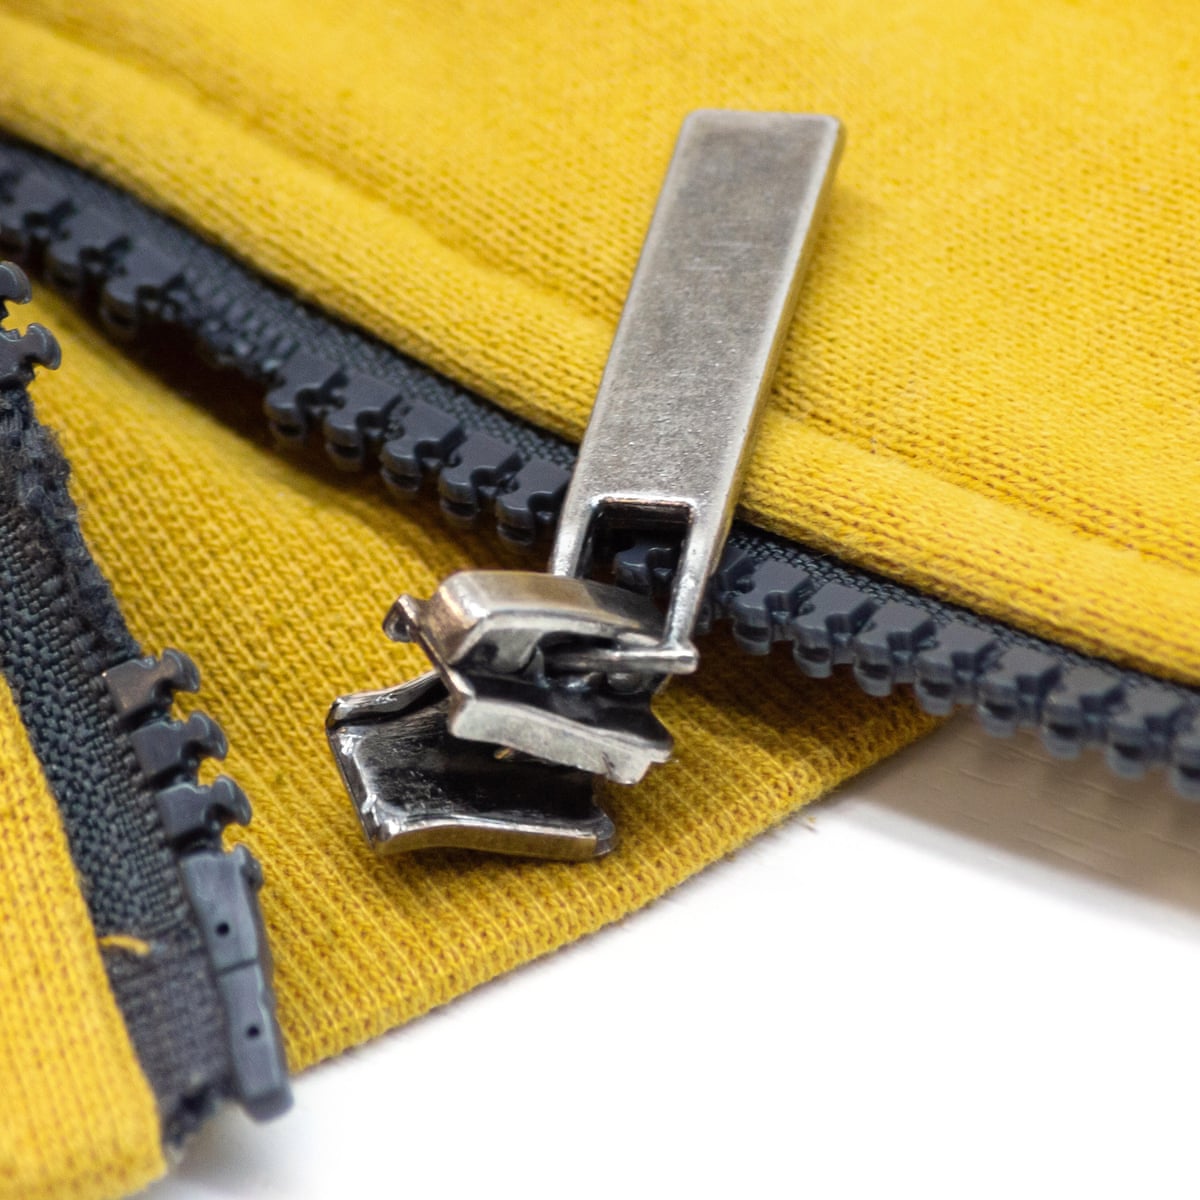 How to fix a broken zipper – and not give up on the garment